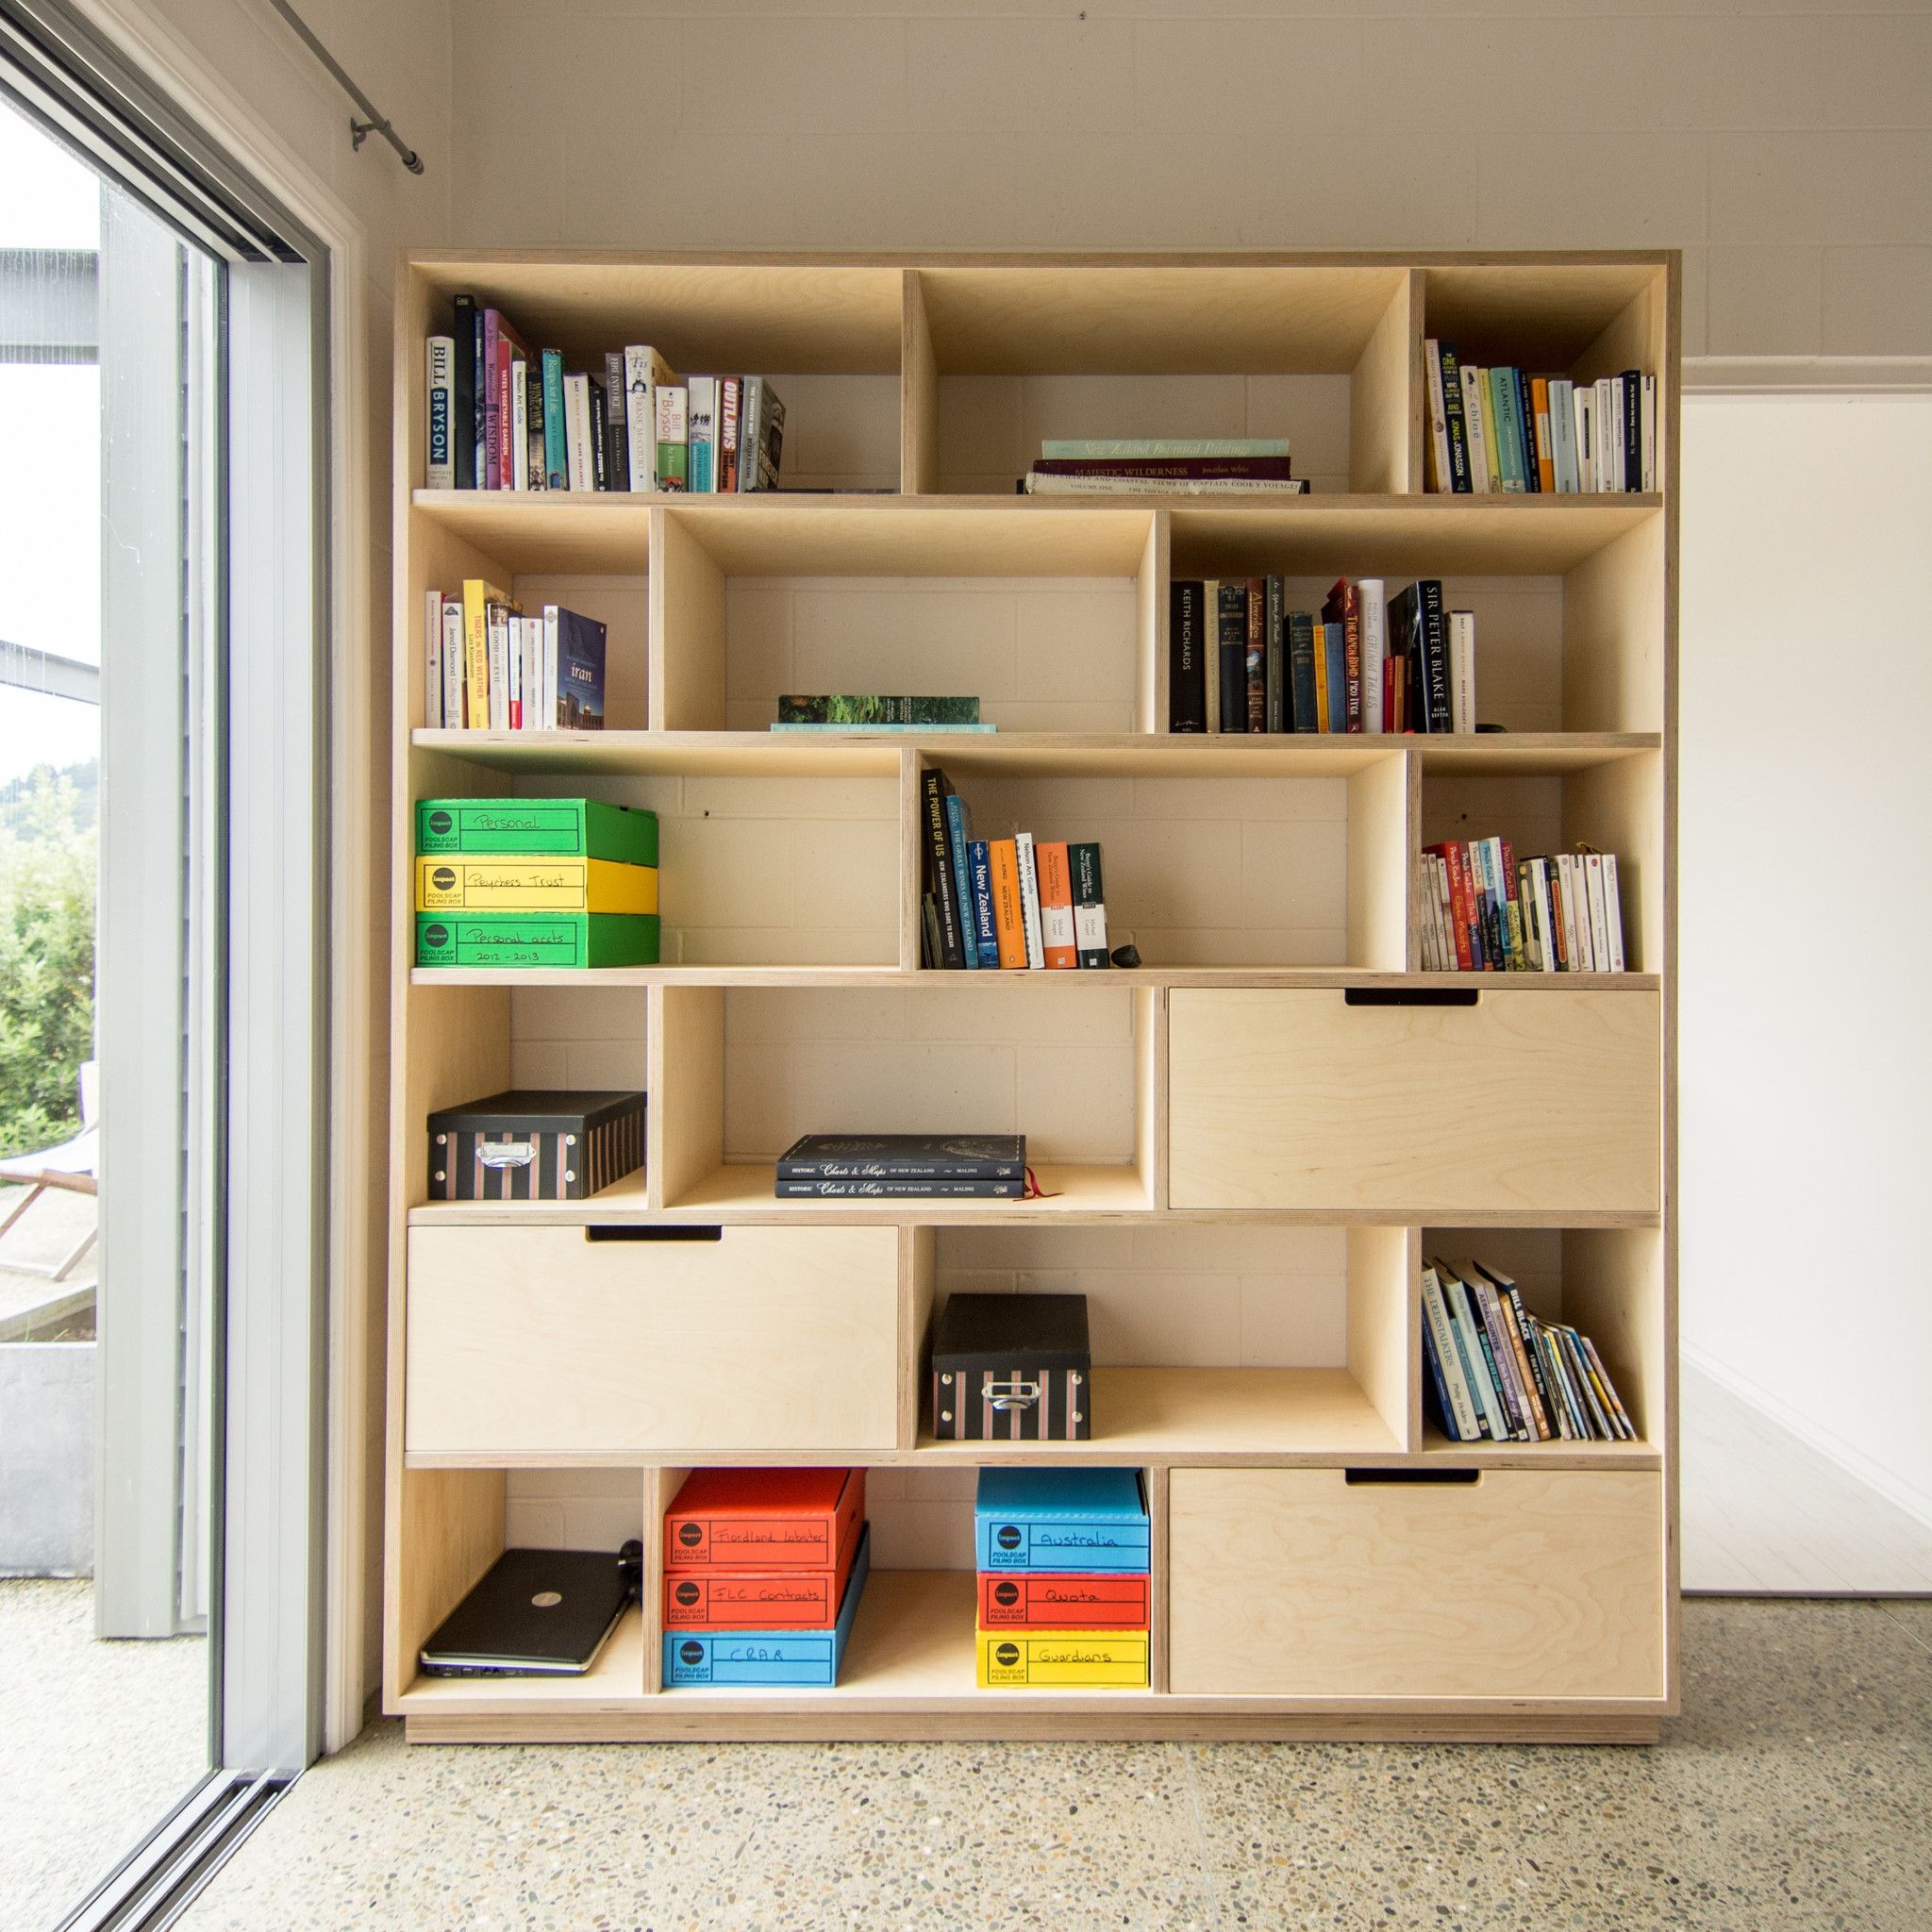 Combination Of Bookshelf And Office Storage Made From Birch With Regard To Bookshelf Drawer Combination (View 10 of 15)